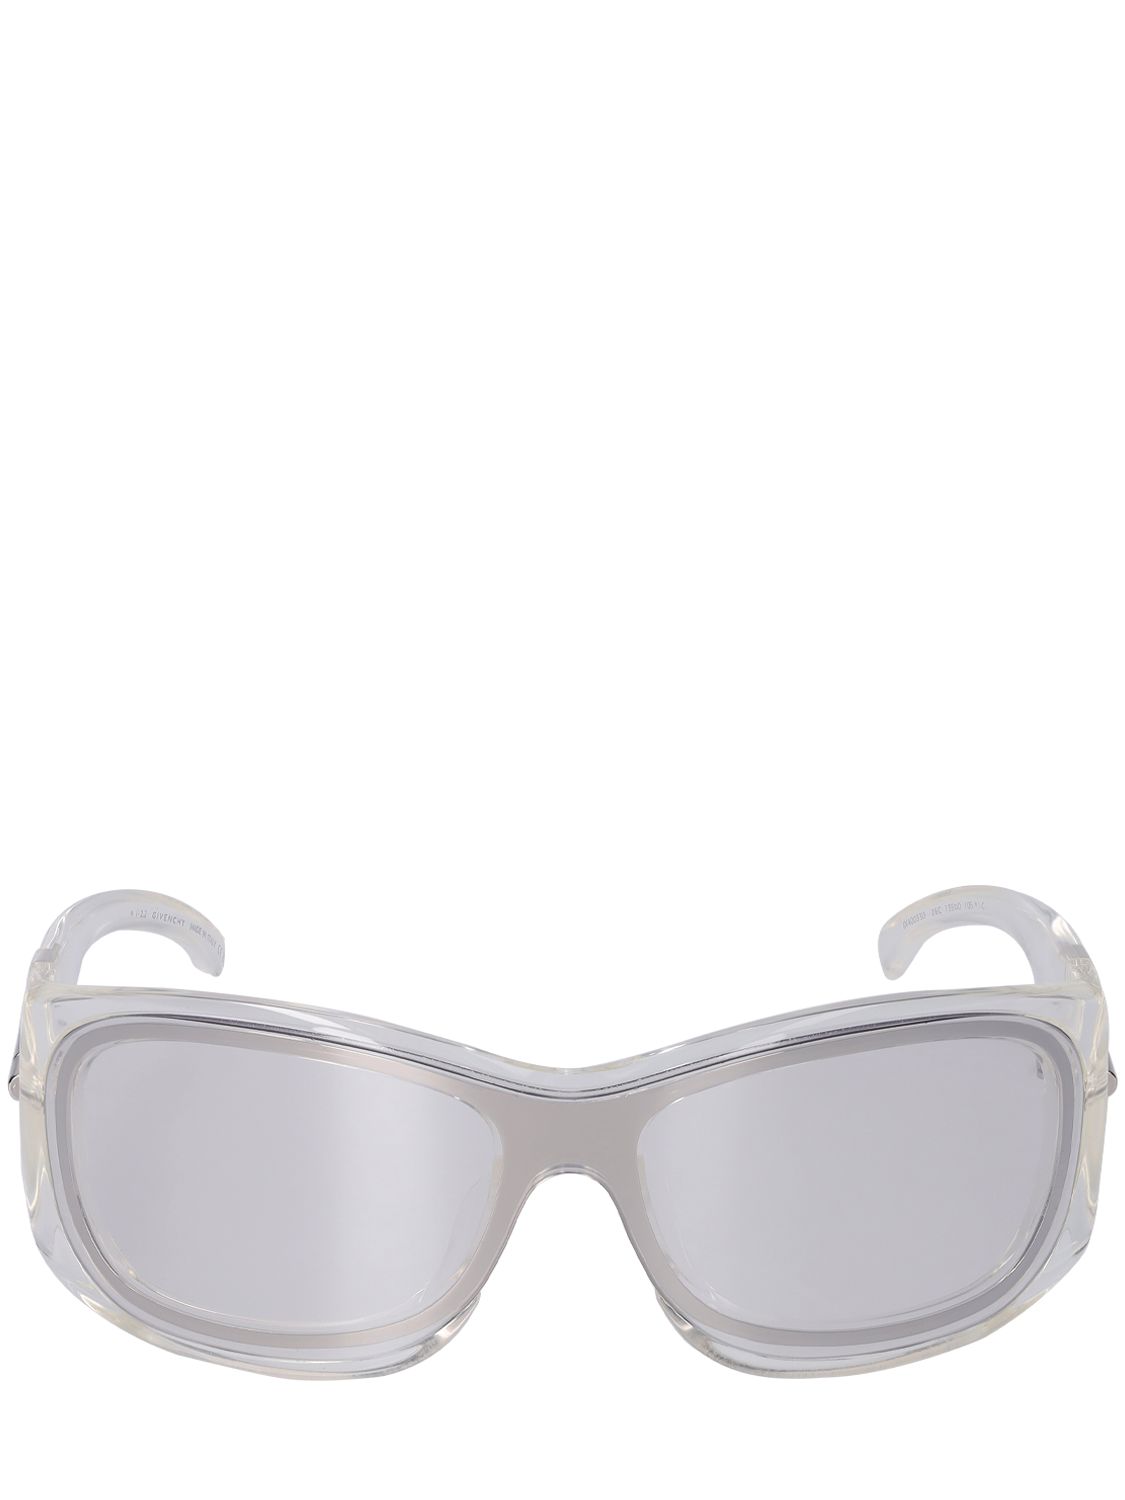 Givenchy G180 Oval Sunglasses In Gray